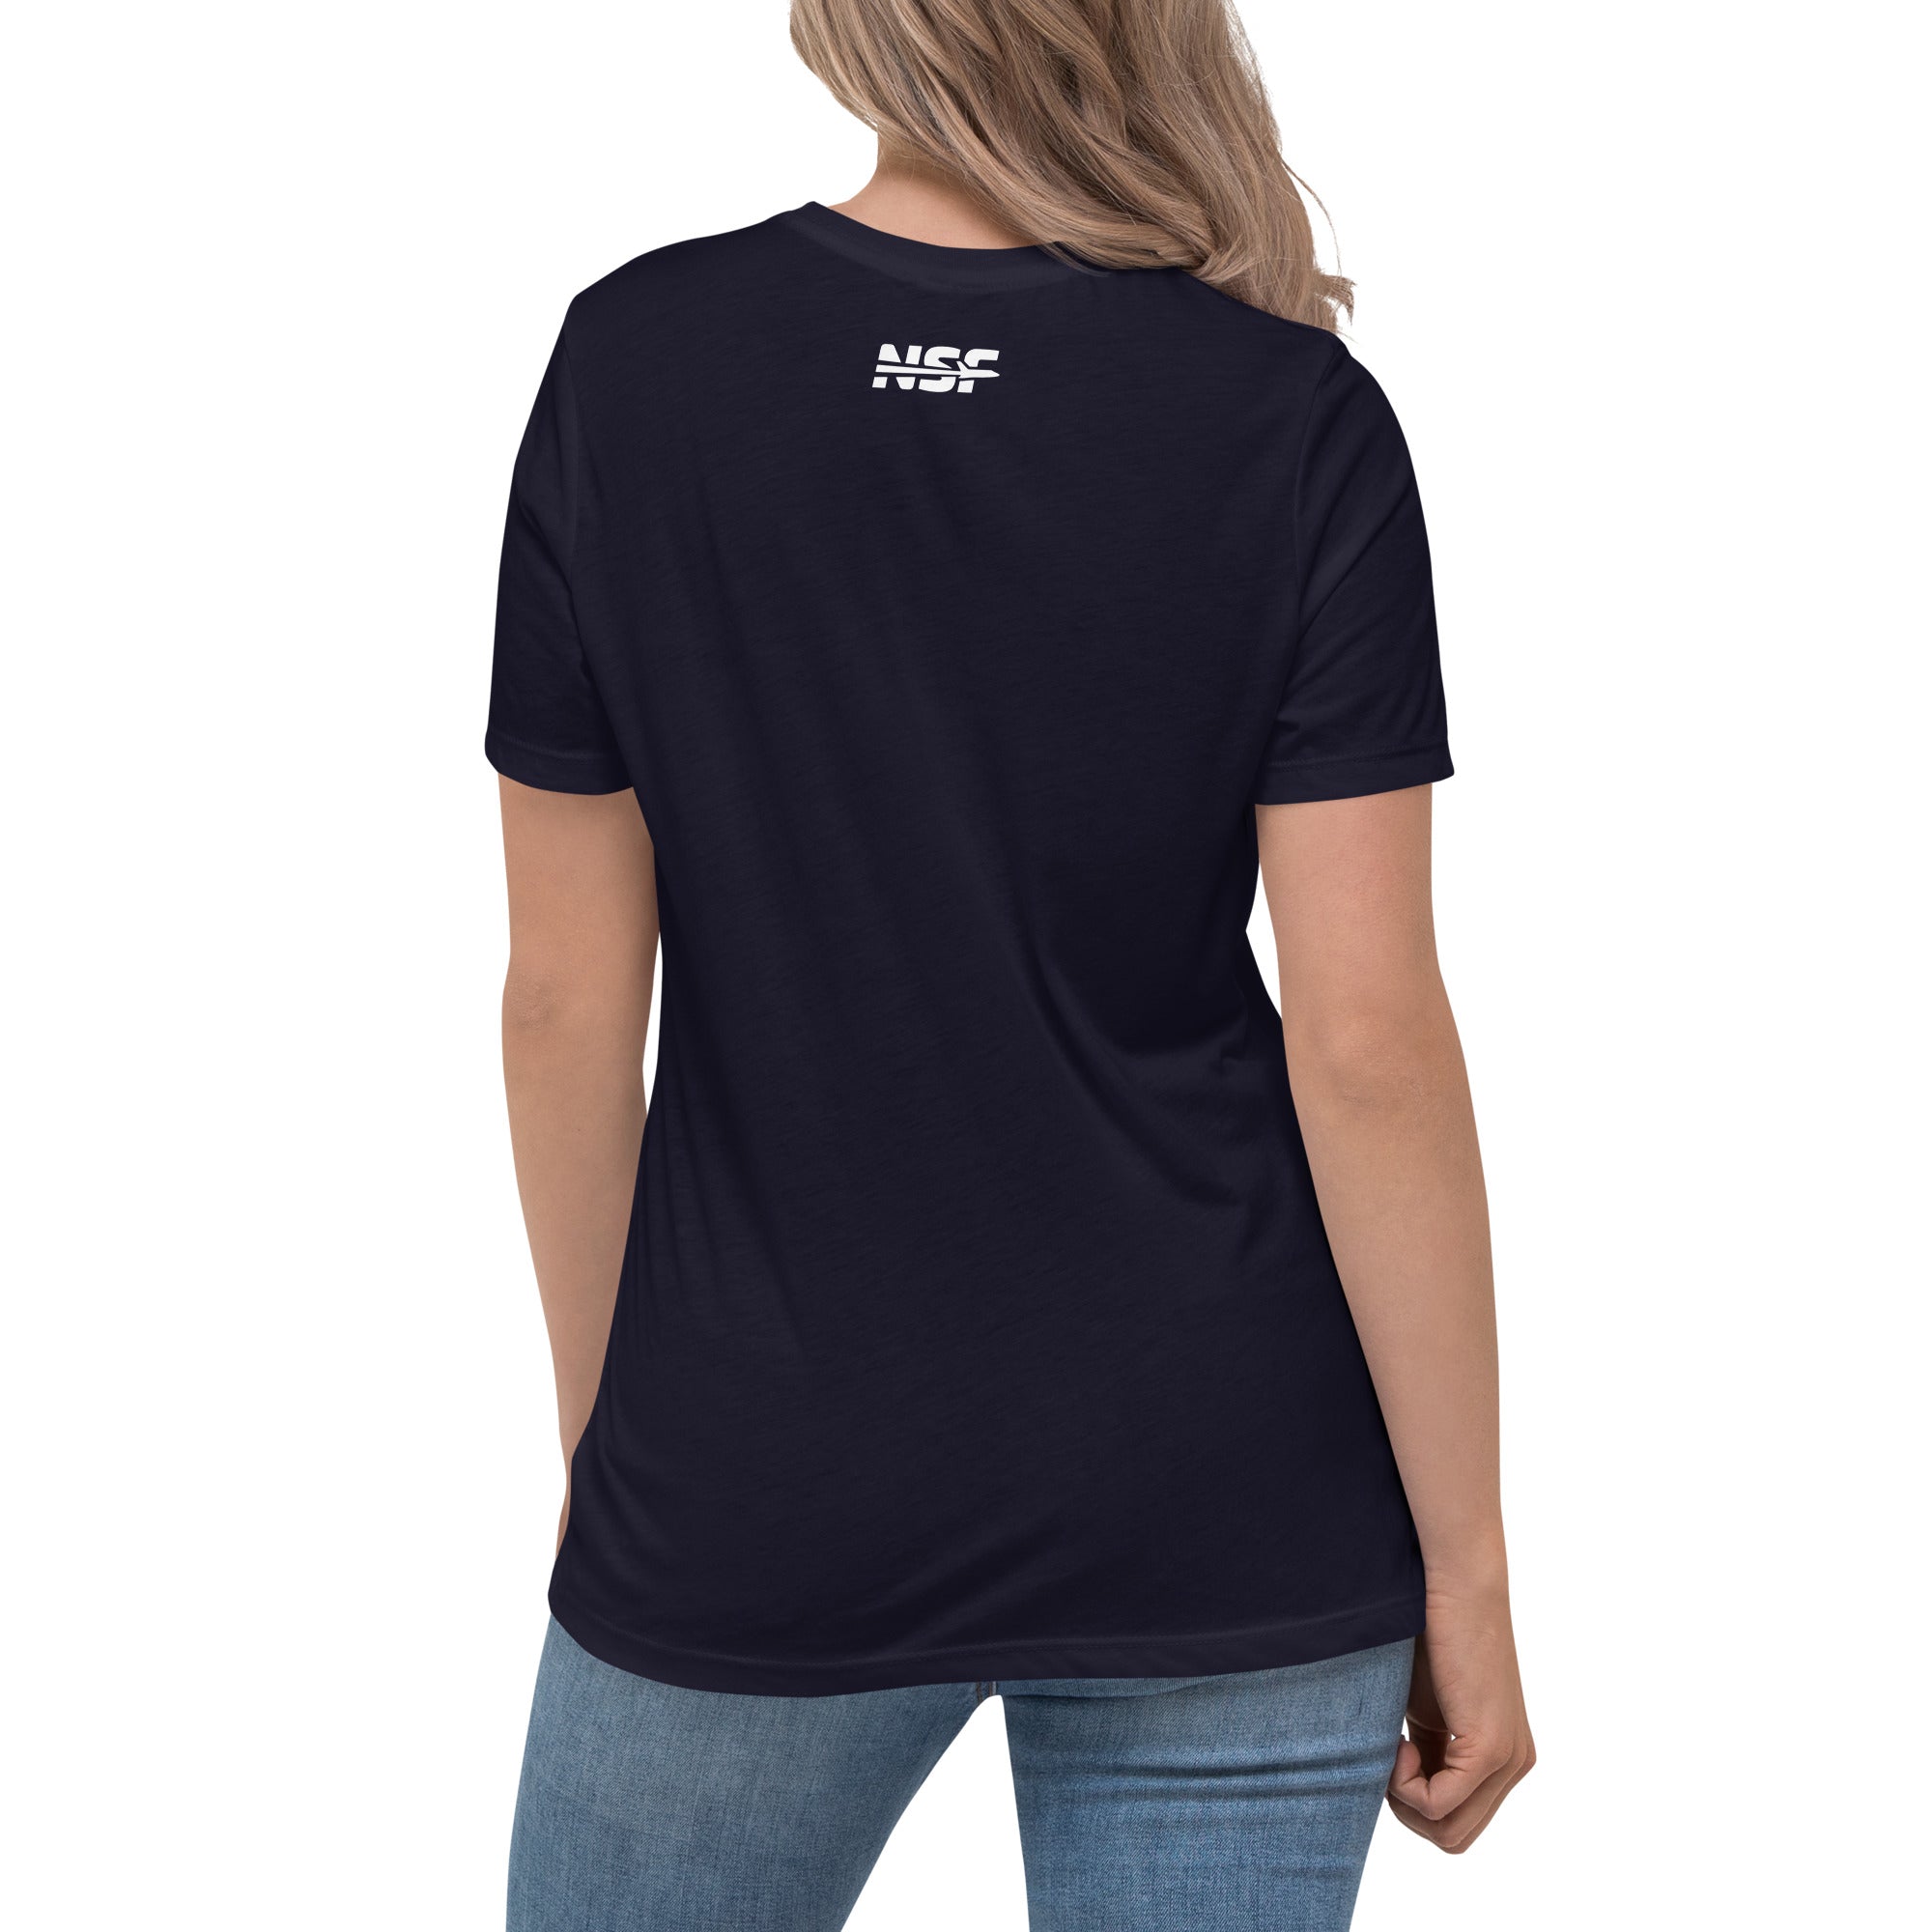 To the Moon and Mars - Women's T-Shirt